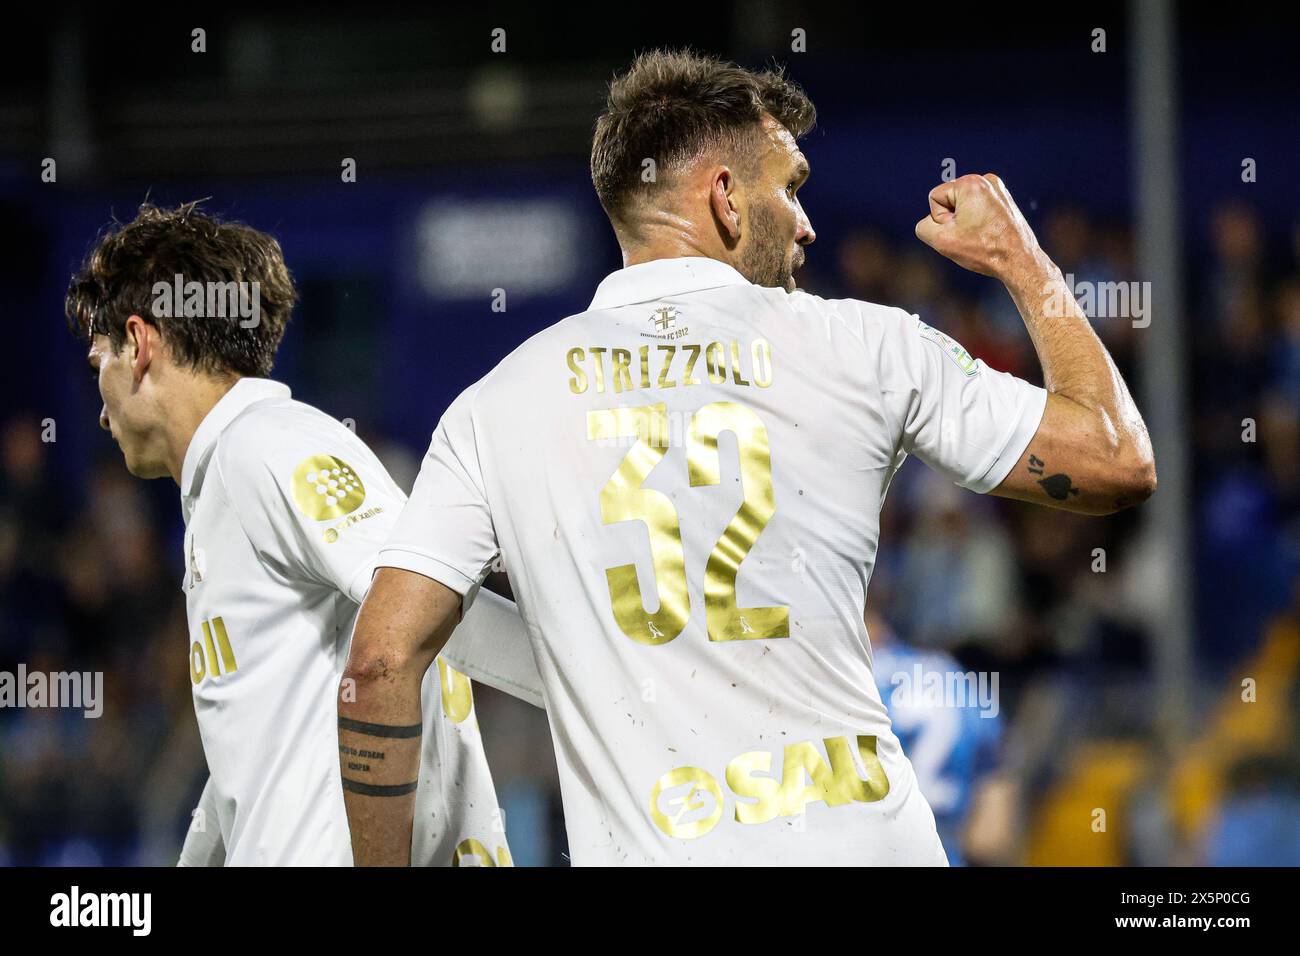 Lecco, Italy. 10th May, 2024. Luca Strizzolo (Modena) celebrates after scoring the gol of 1-3 during Lecco 1912 vs Modena FC, Italian soccer Serie B match in Lecco, Italy, May 10 2024 Credit: Independent Photo Agency/Alamy Live News Stock Photo